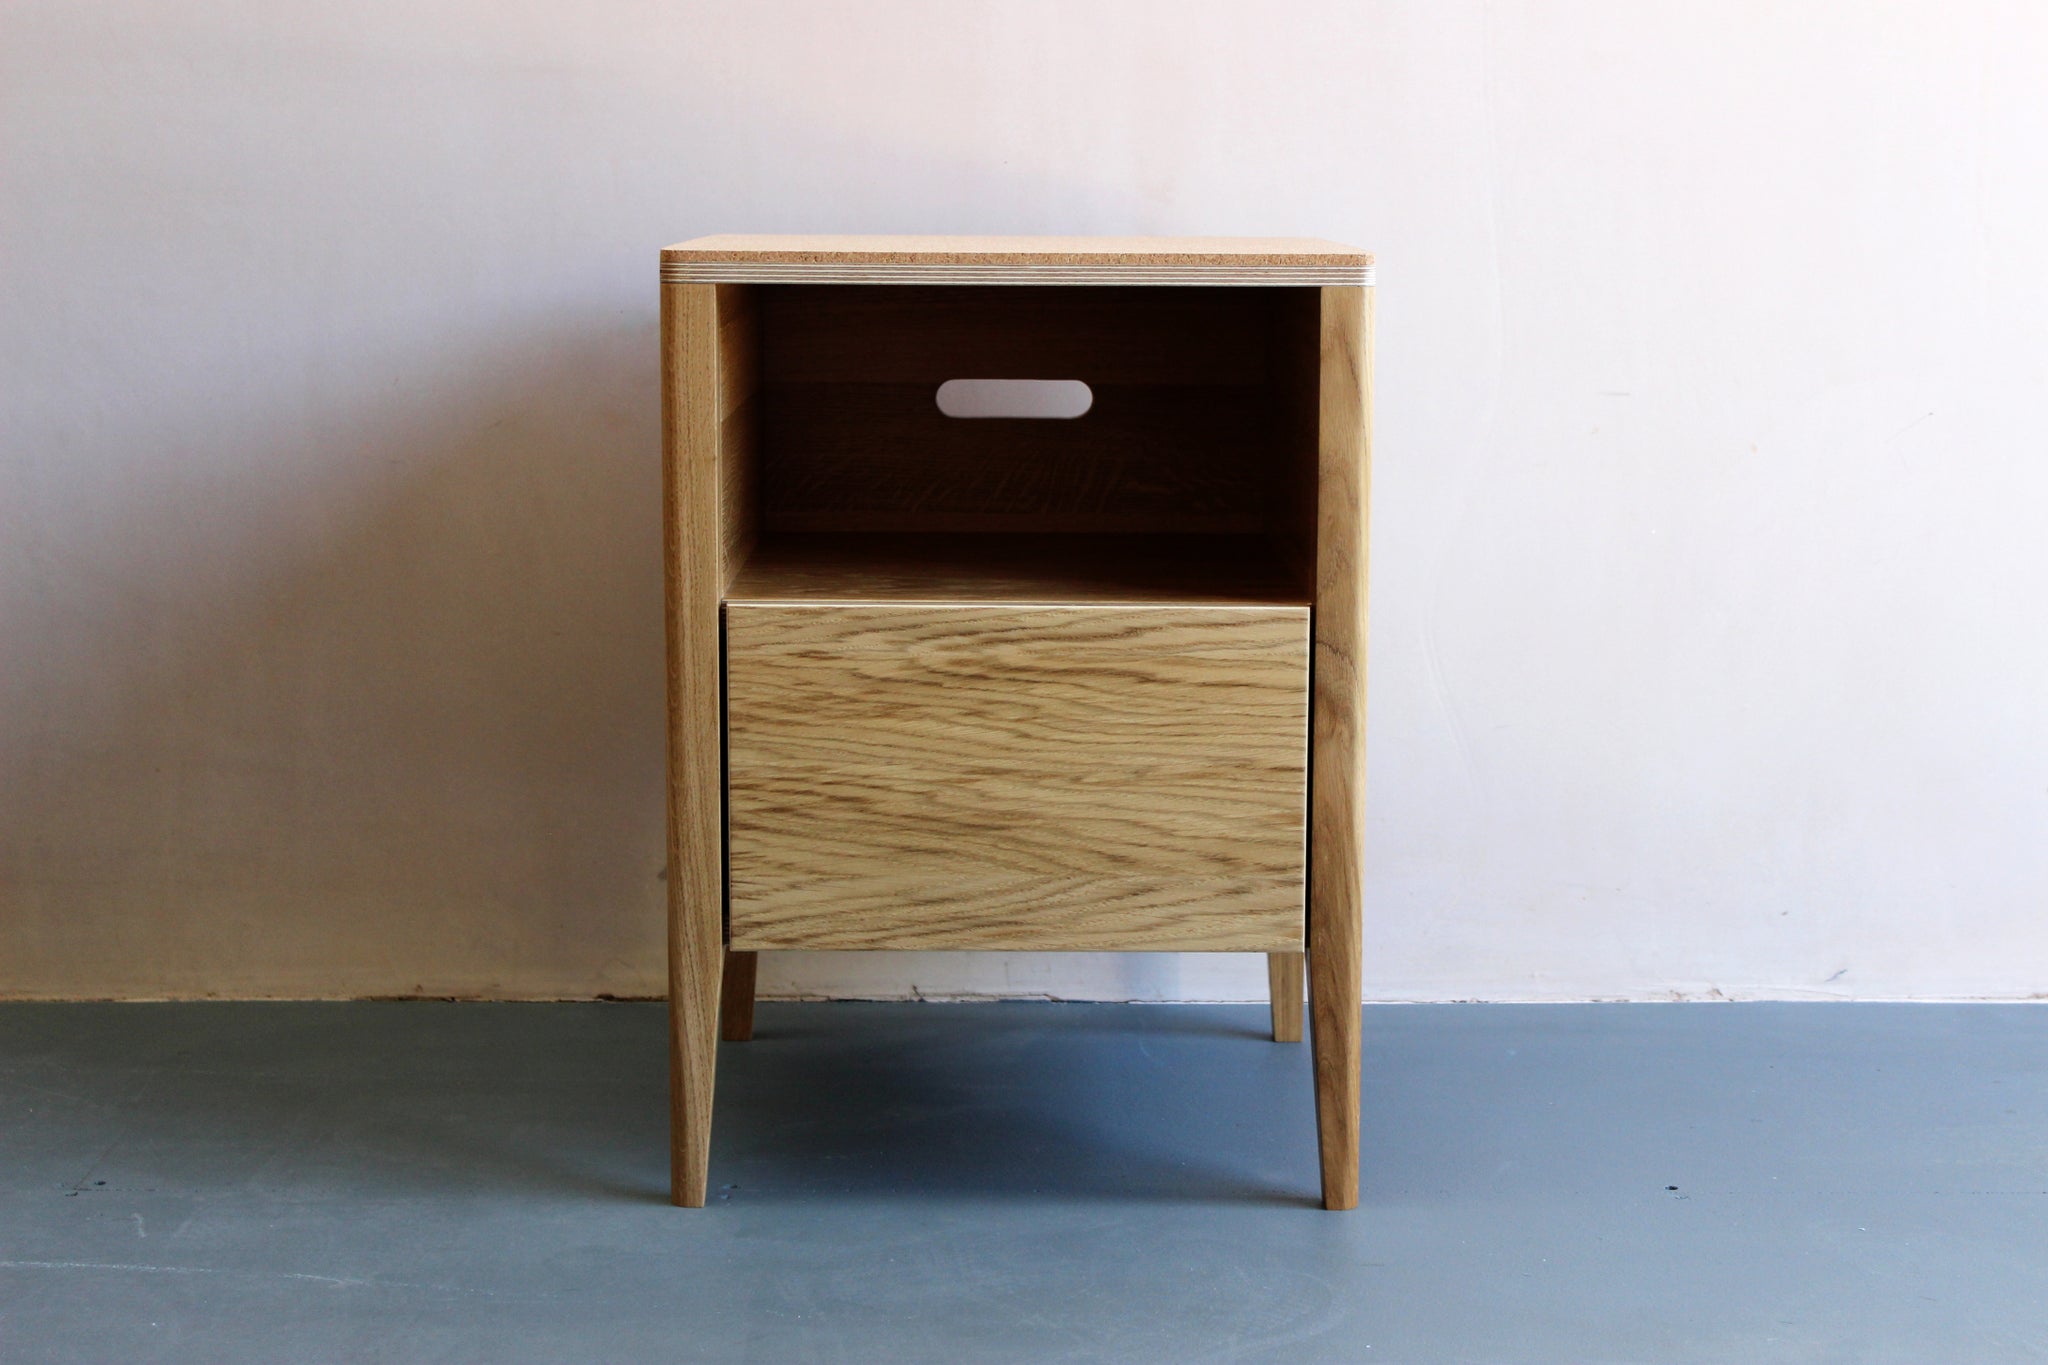 Handmade bedside table| cabinet, perfect for a modern home. It features cork top with oak veneered plywood and solid oak legs. Made by Jon Grant London in Leyton, East London.